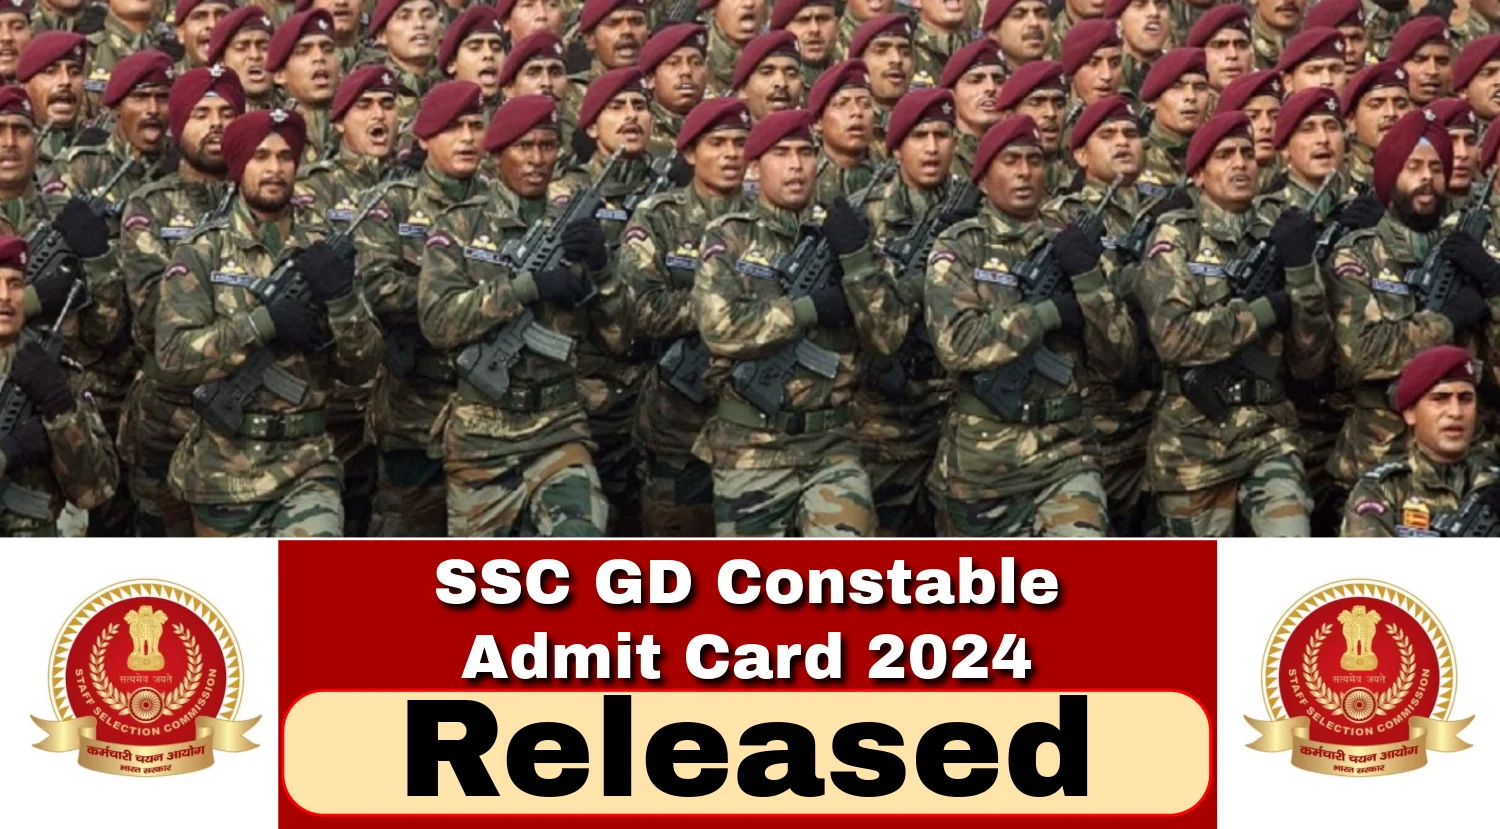 SSC GD Constable Admit Card 2024 Released, Check Your Exam City and Schedule Now